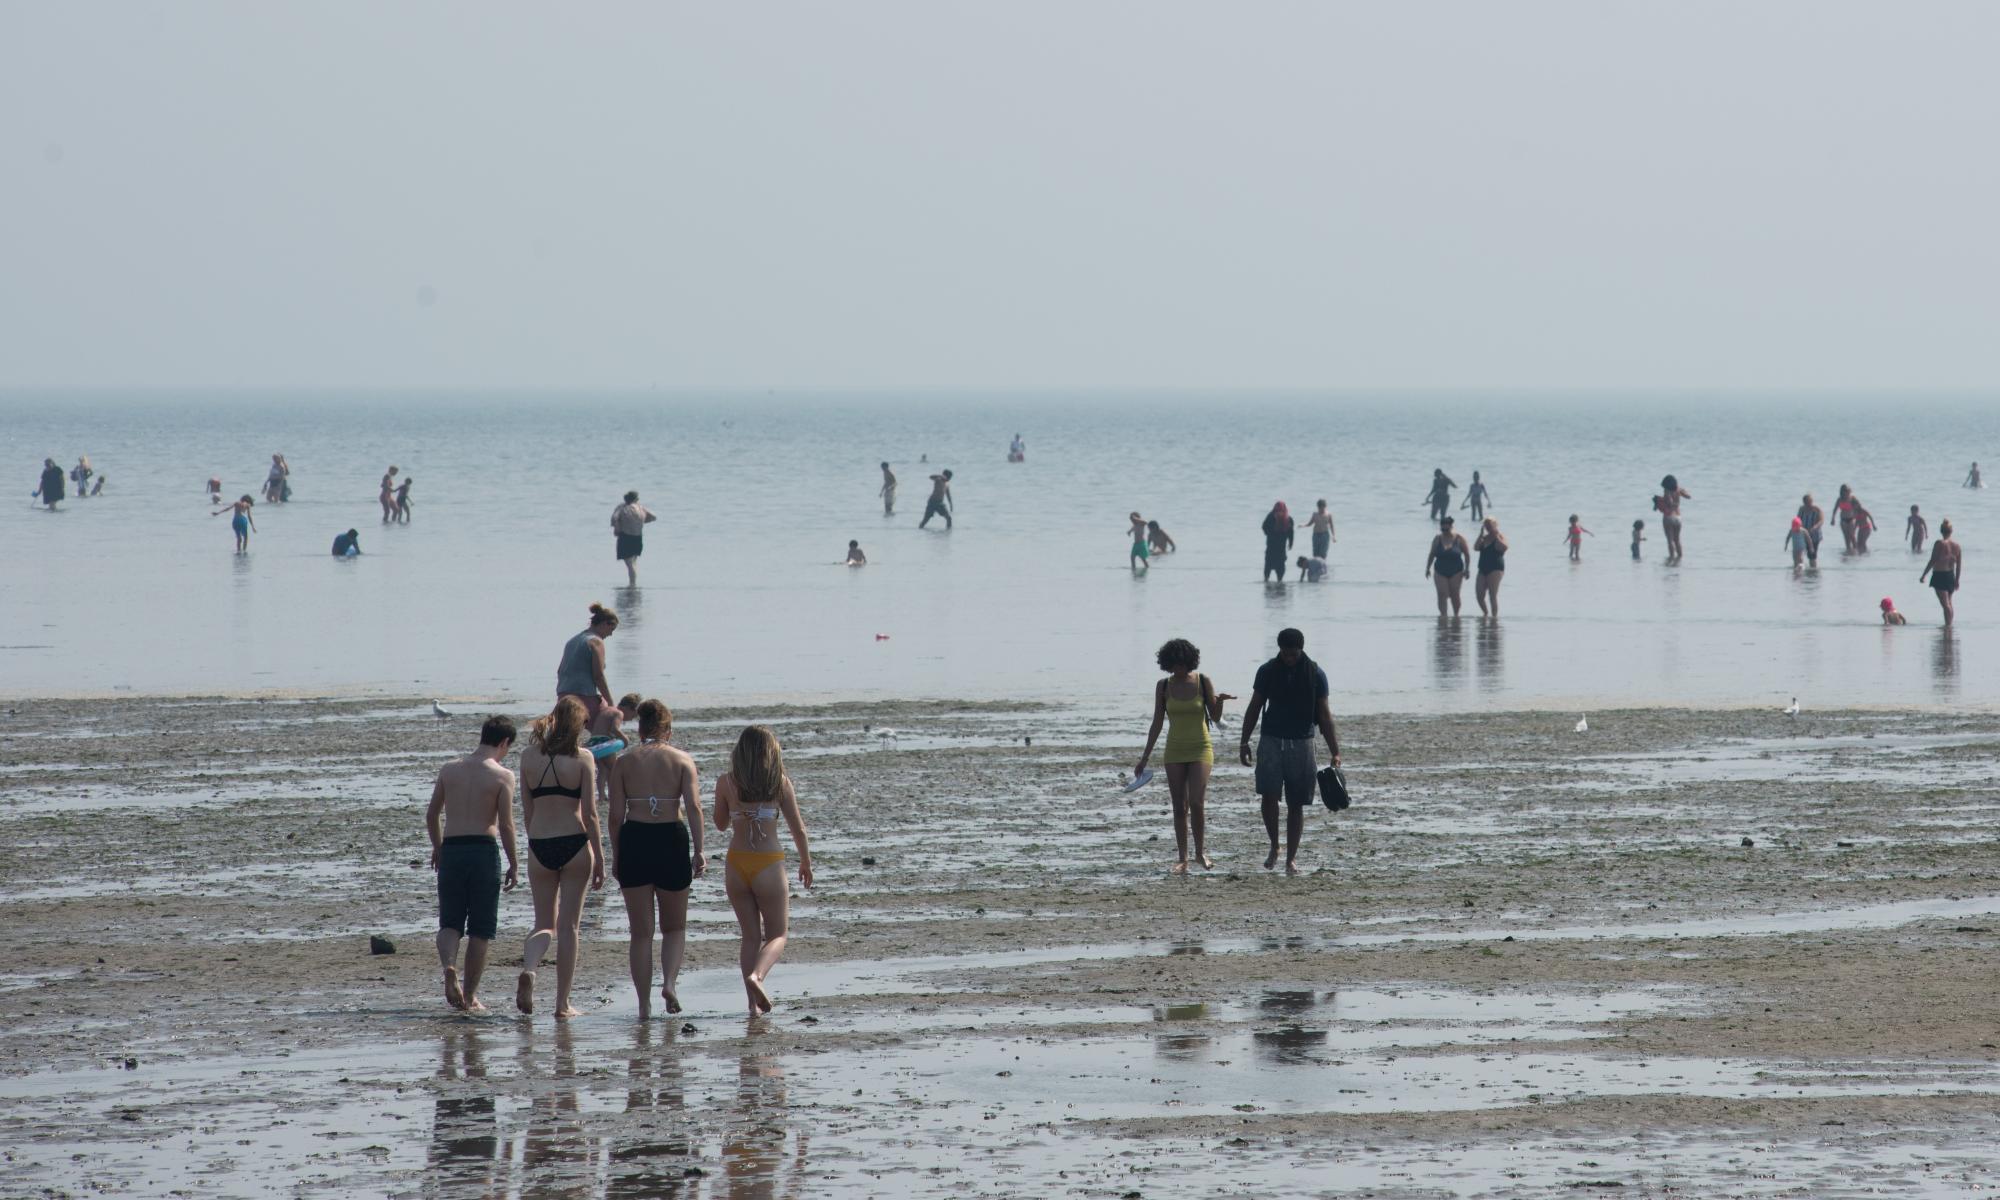 England's pollution levels soared during August heatwave